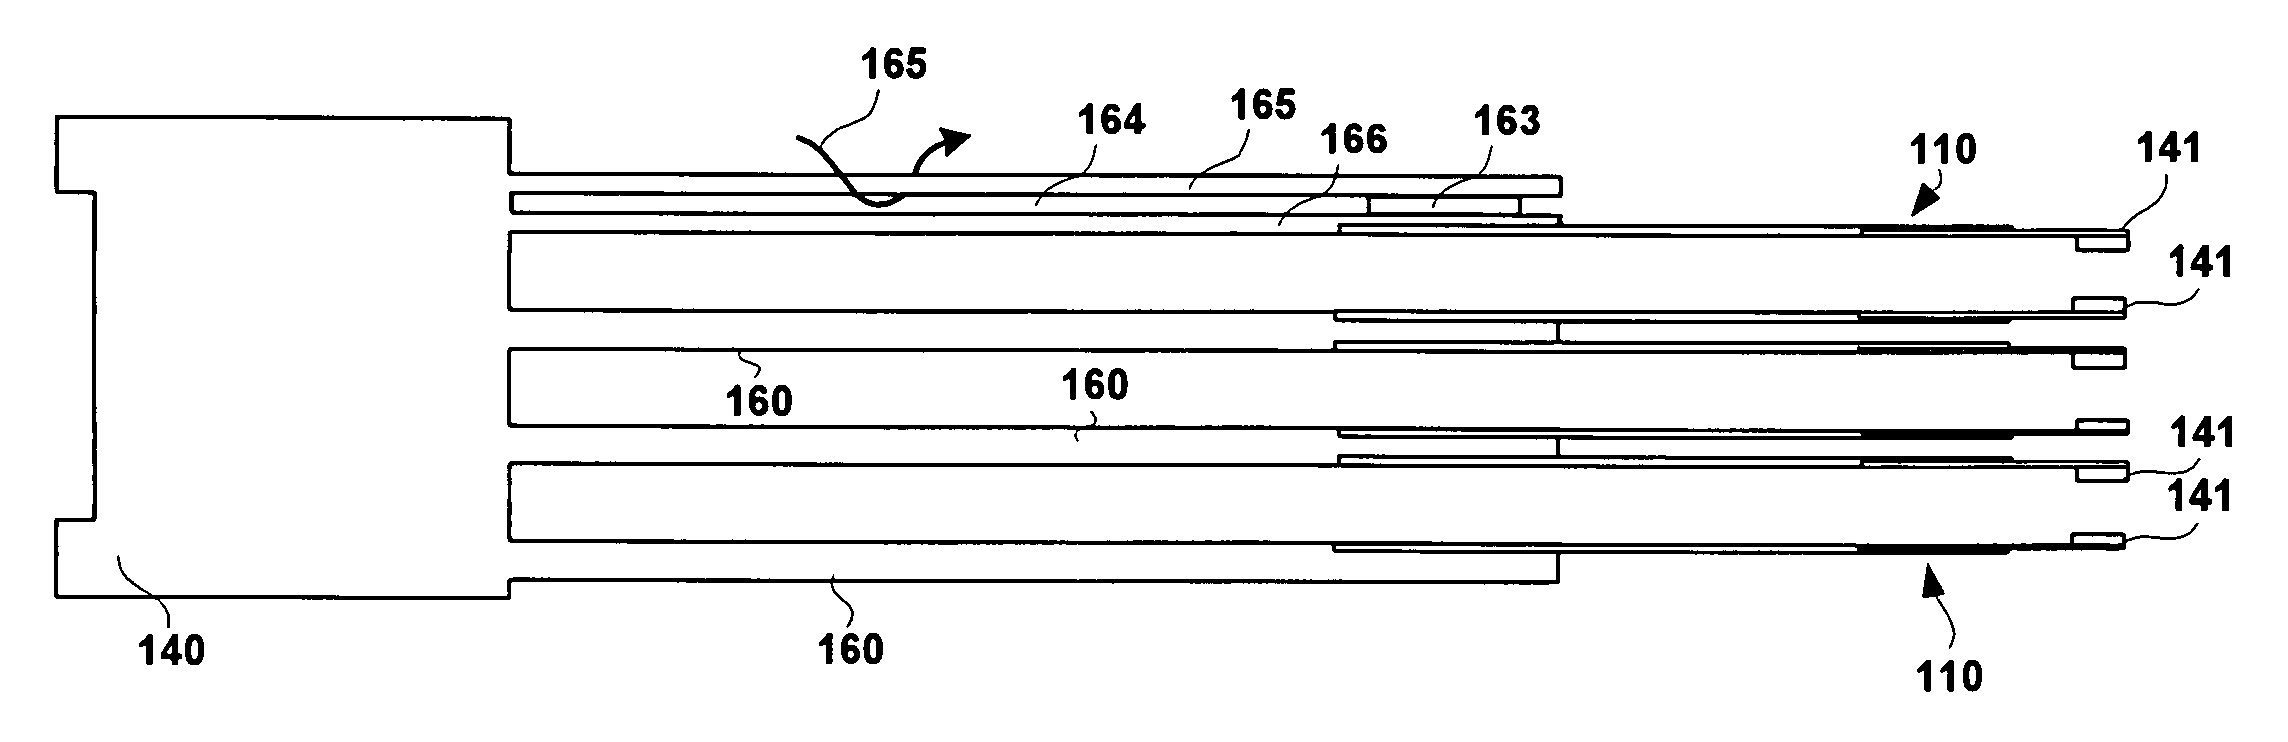 Disk drive actuator arm assembly having one or more slotted actuator arms